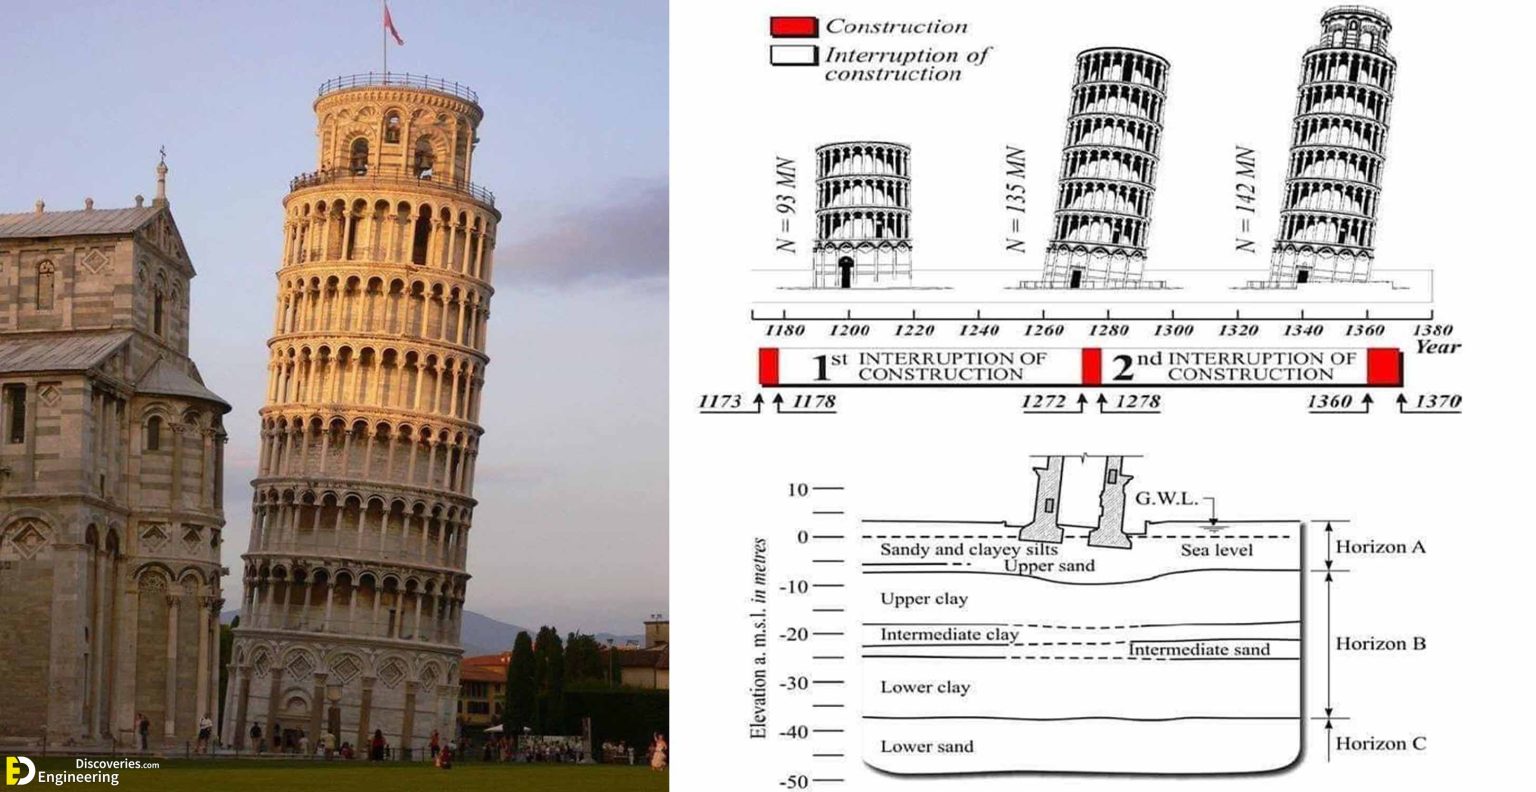 leaning tower of pisa location